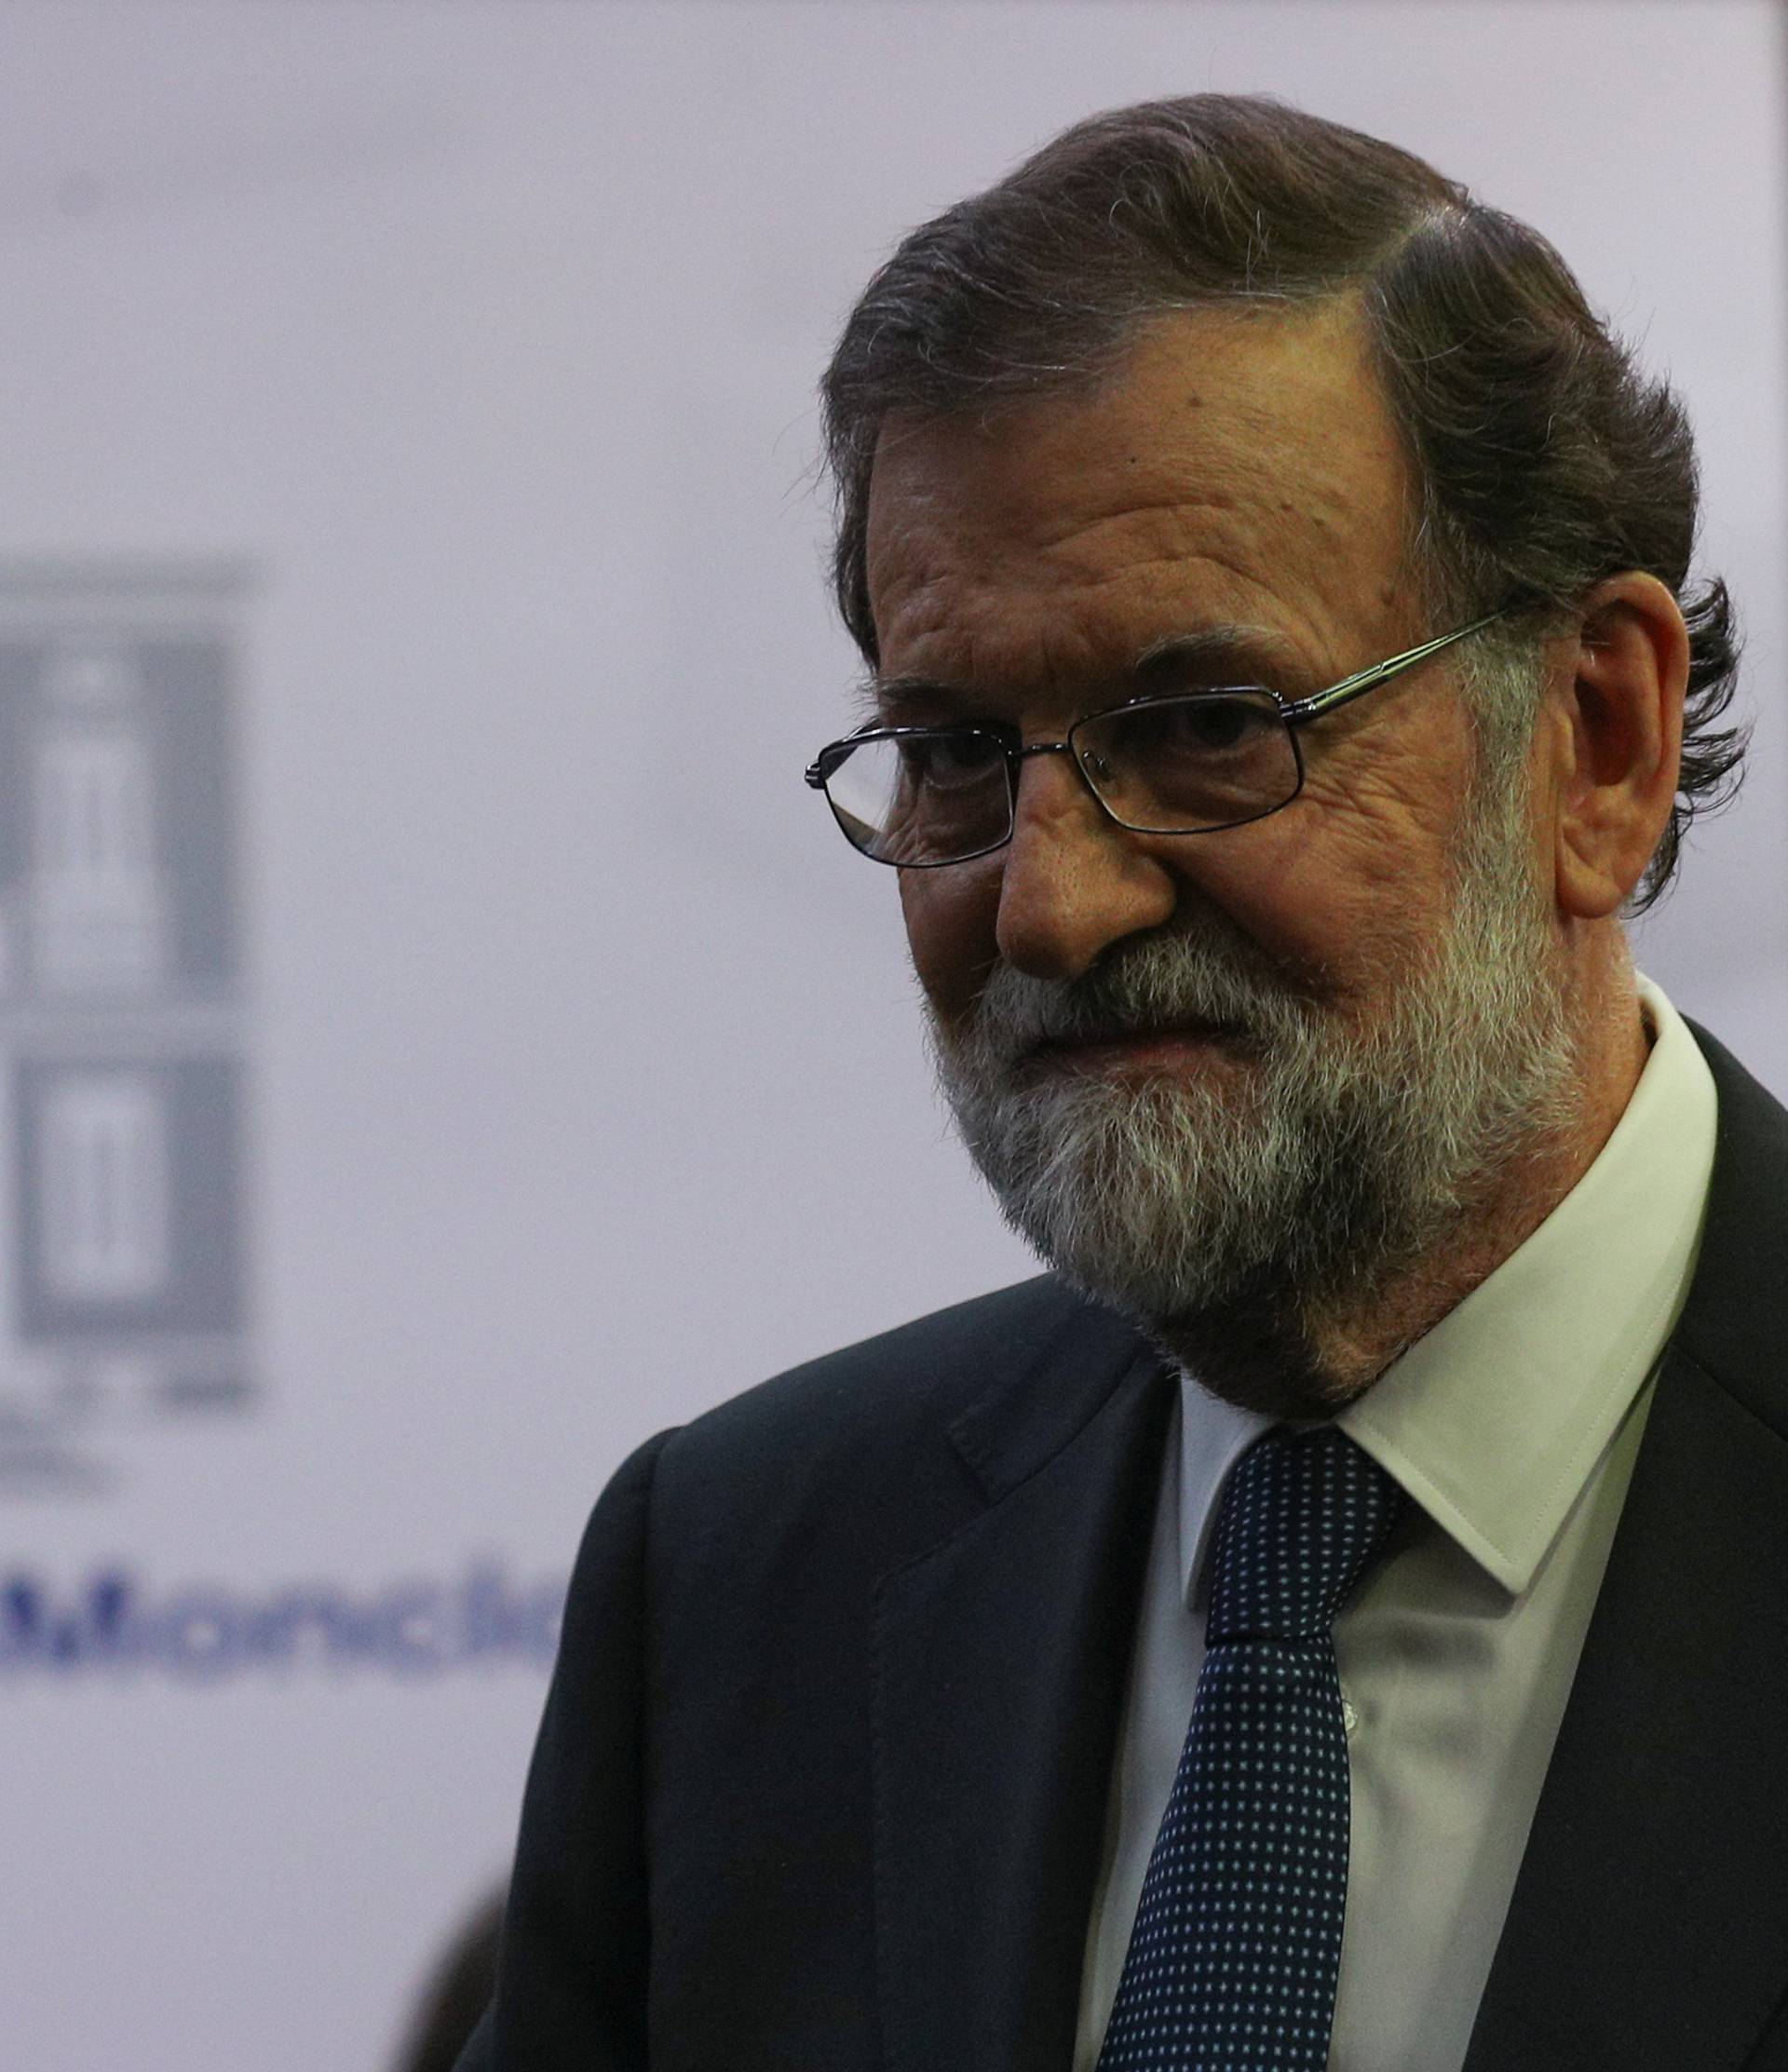 Spain's PM Rajoy leaves the conference room after delivering a statement at the Moncloa Palace in Madrid